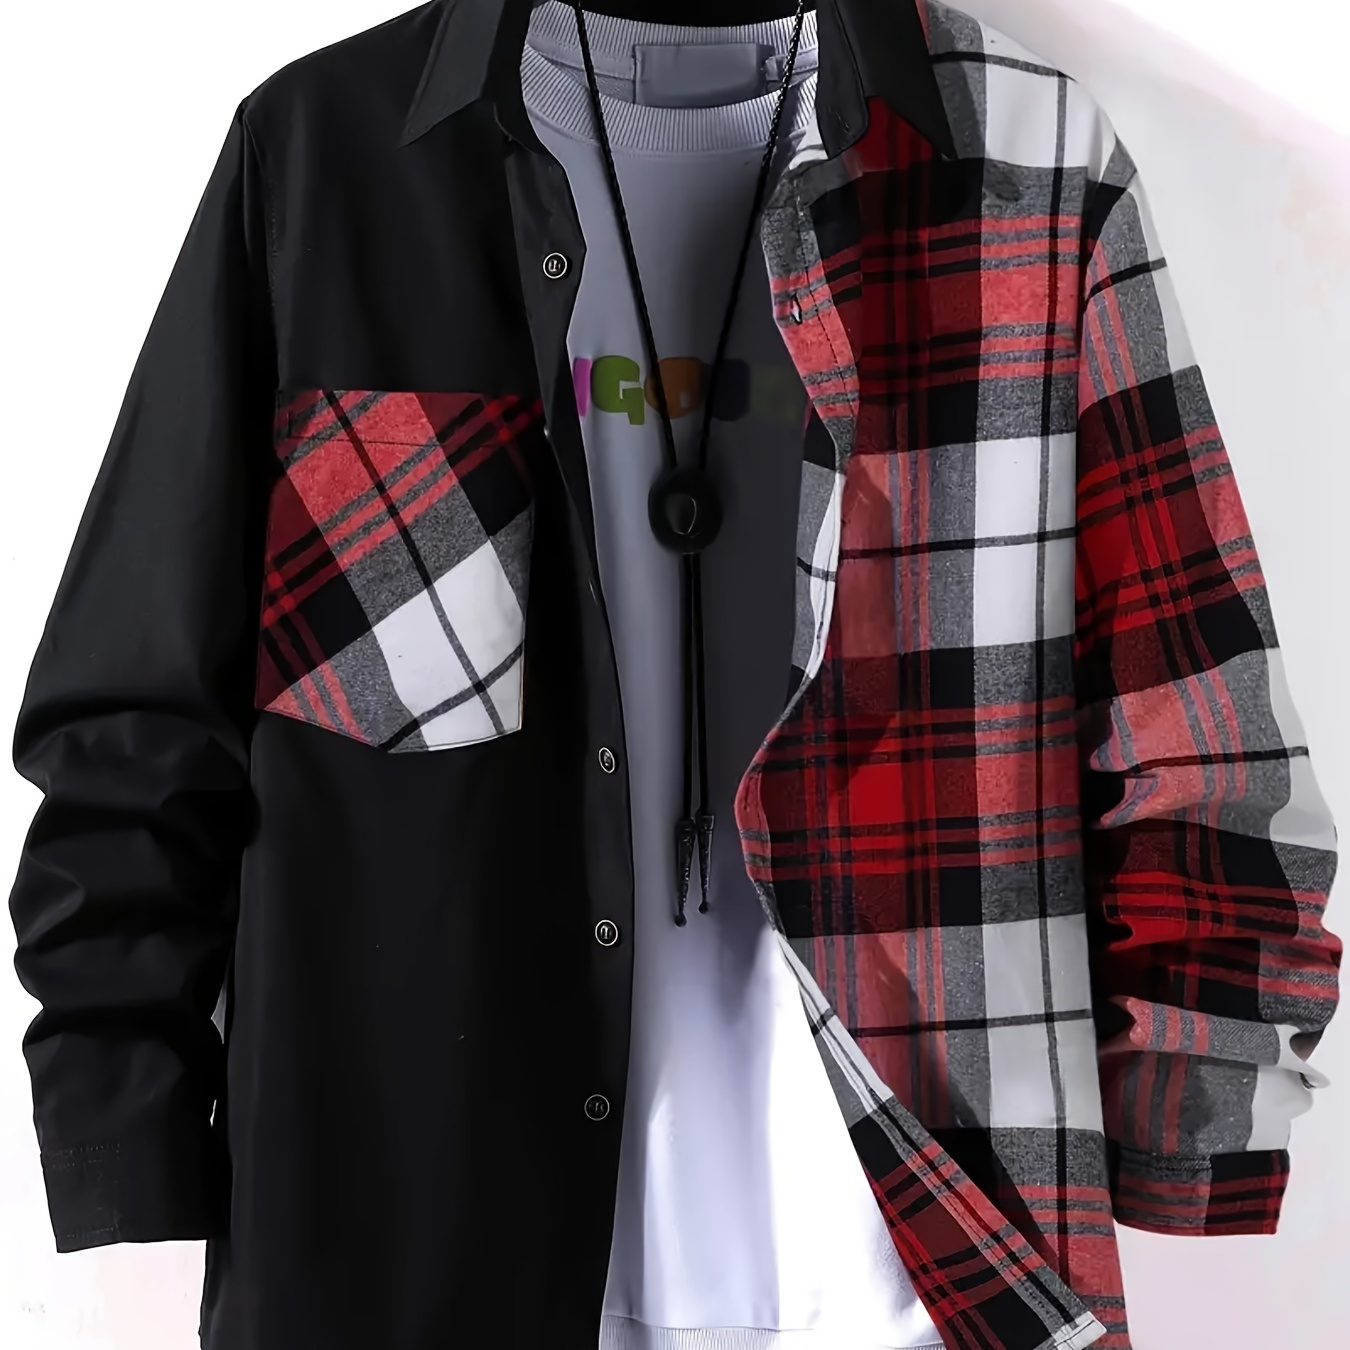 

1 Size Small, Plus Size Men's Colorblock Plaid Shirt With Breast Pocket, Oversized Loose Clothing For Big And Tall Guys, Buy According To The Scale Table